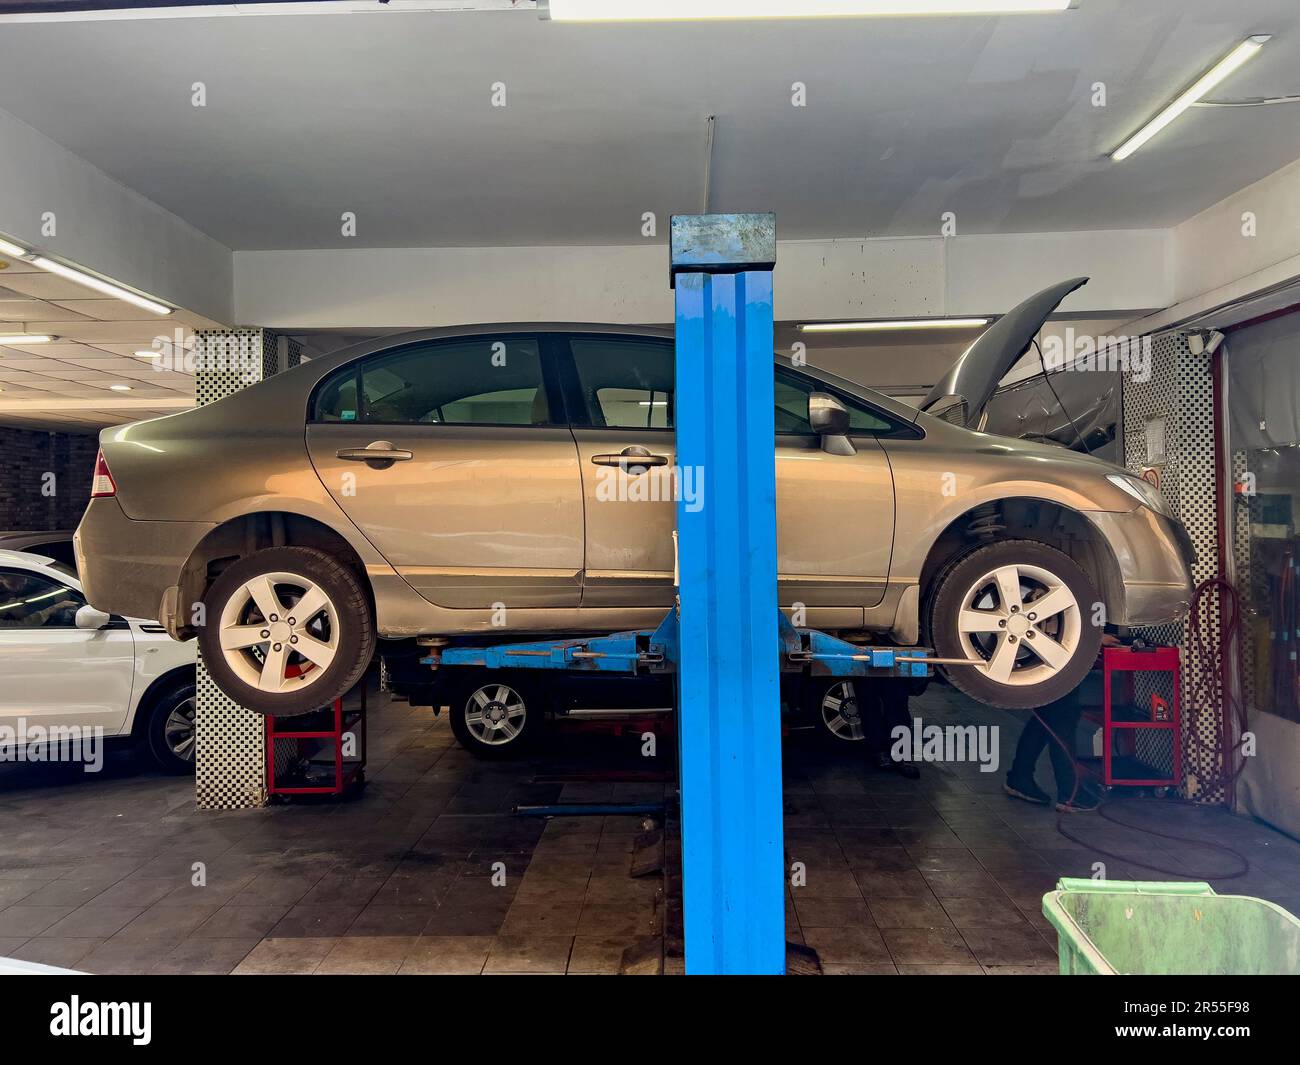 Car on lift, side view. Car repair shop concept: Automobile service interior background with cars on lift. Maintenance costs. Car accident insurance. Stock Photo